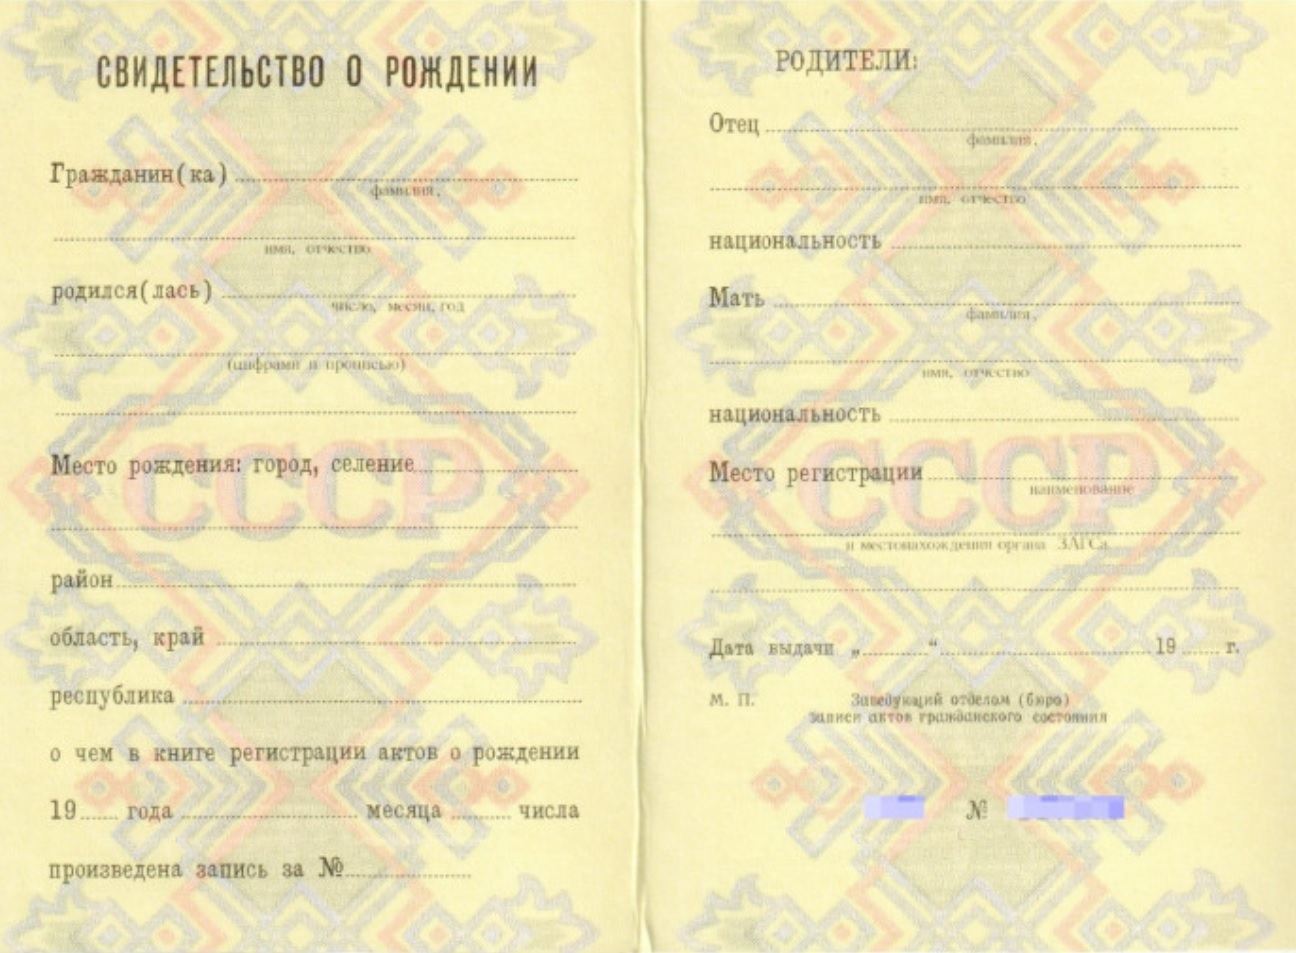 Russian to English translation of USSR birth certificate in the UK